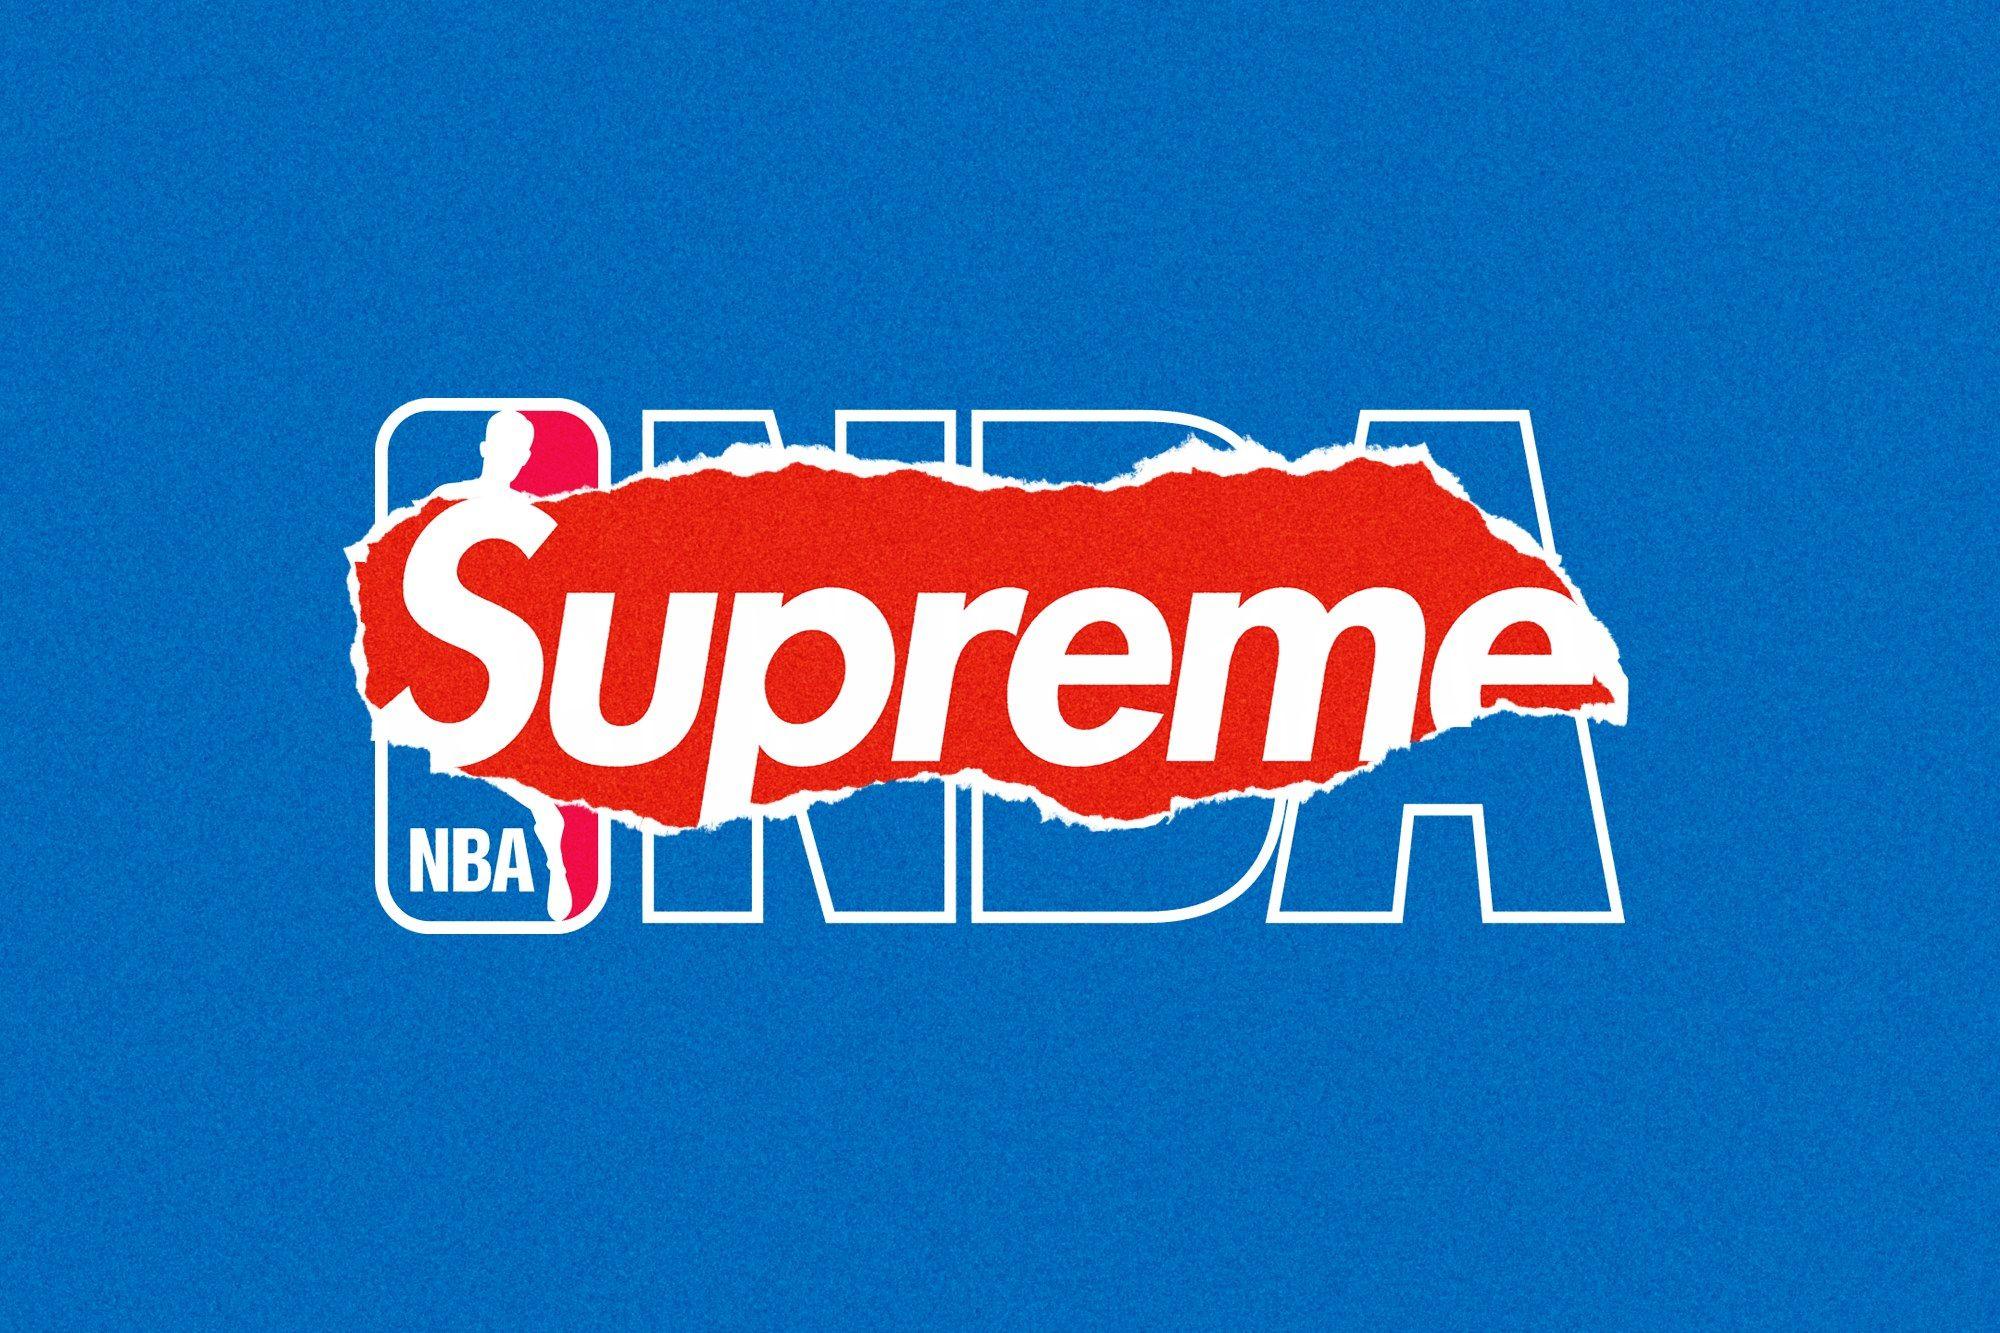 Supreme Logo - NBA Tells J.R. Smith to Cover Up His Supreme Tattoo Or Else | GQ